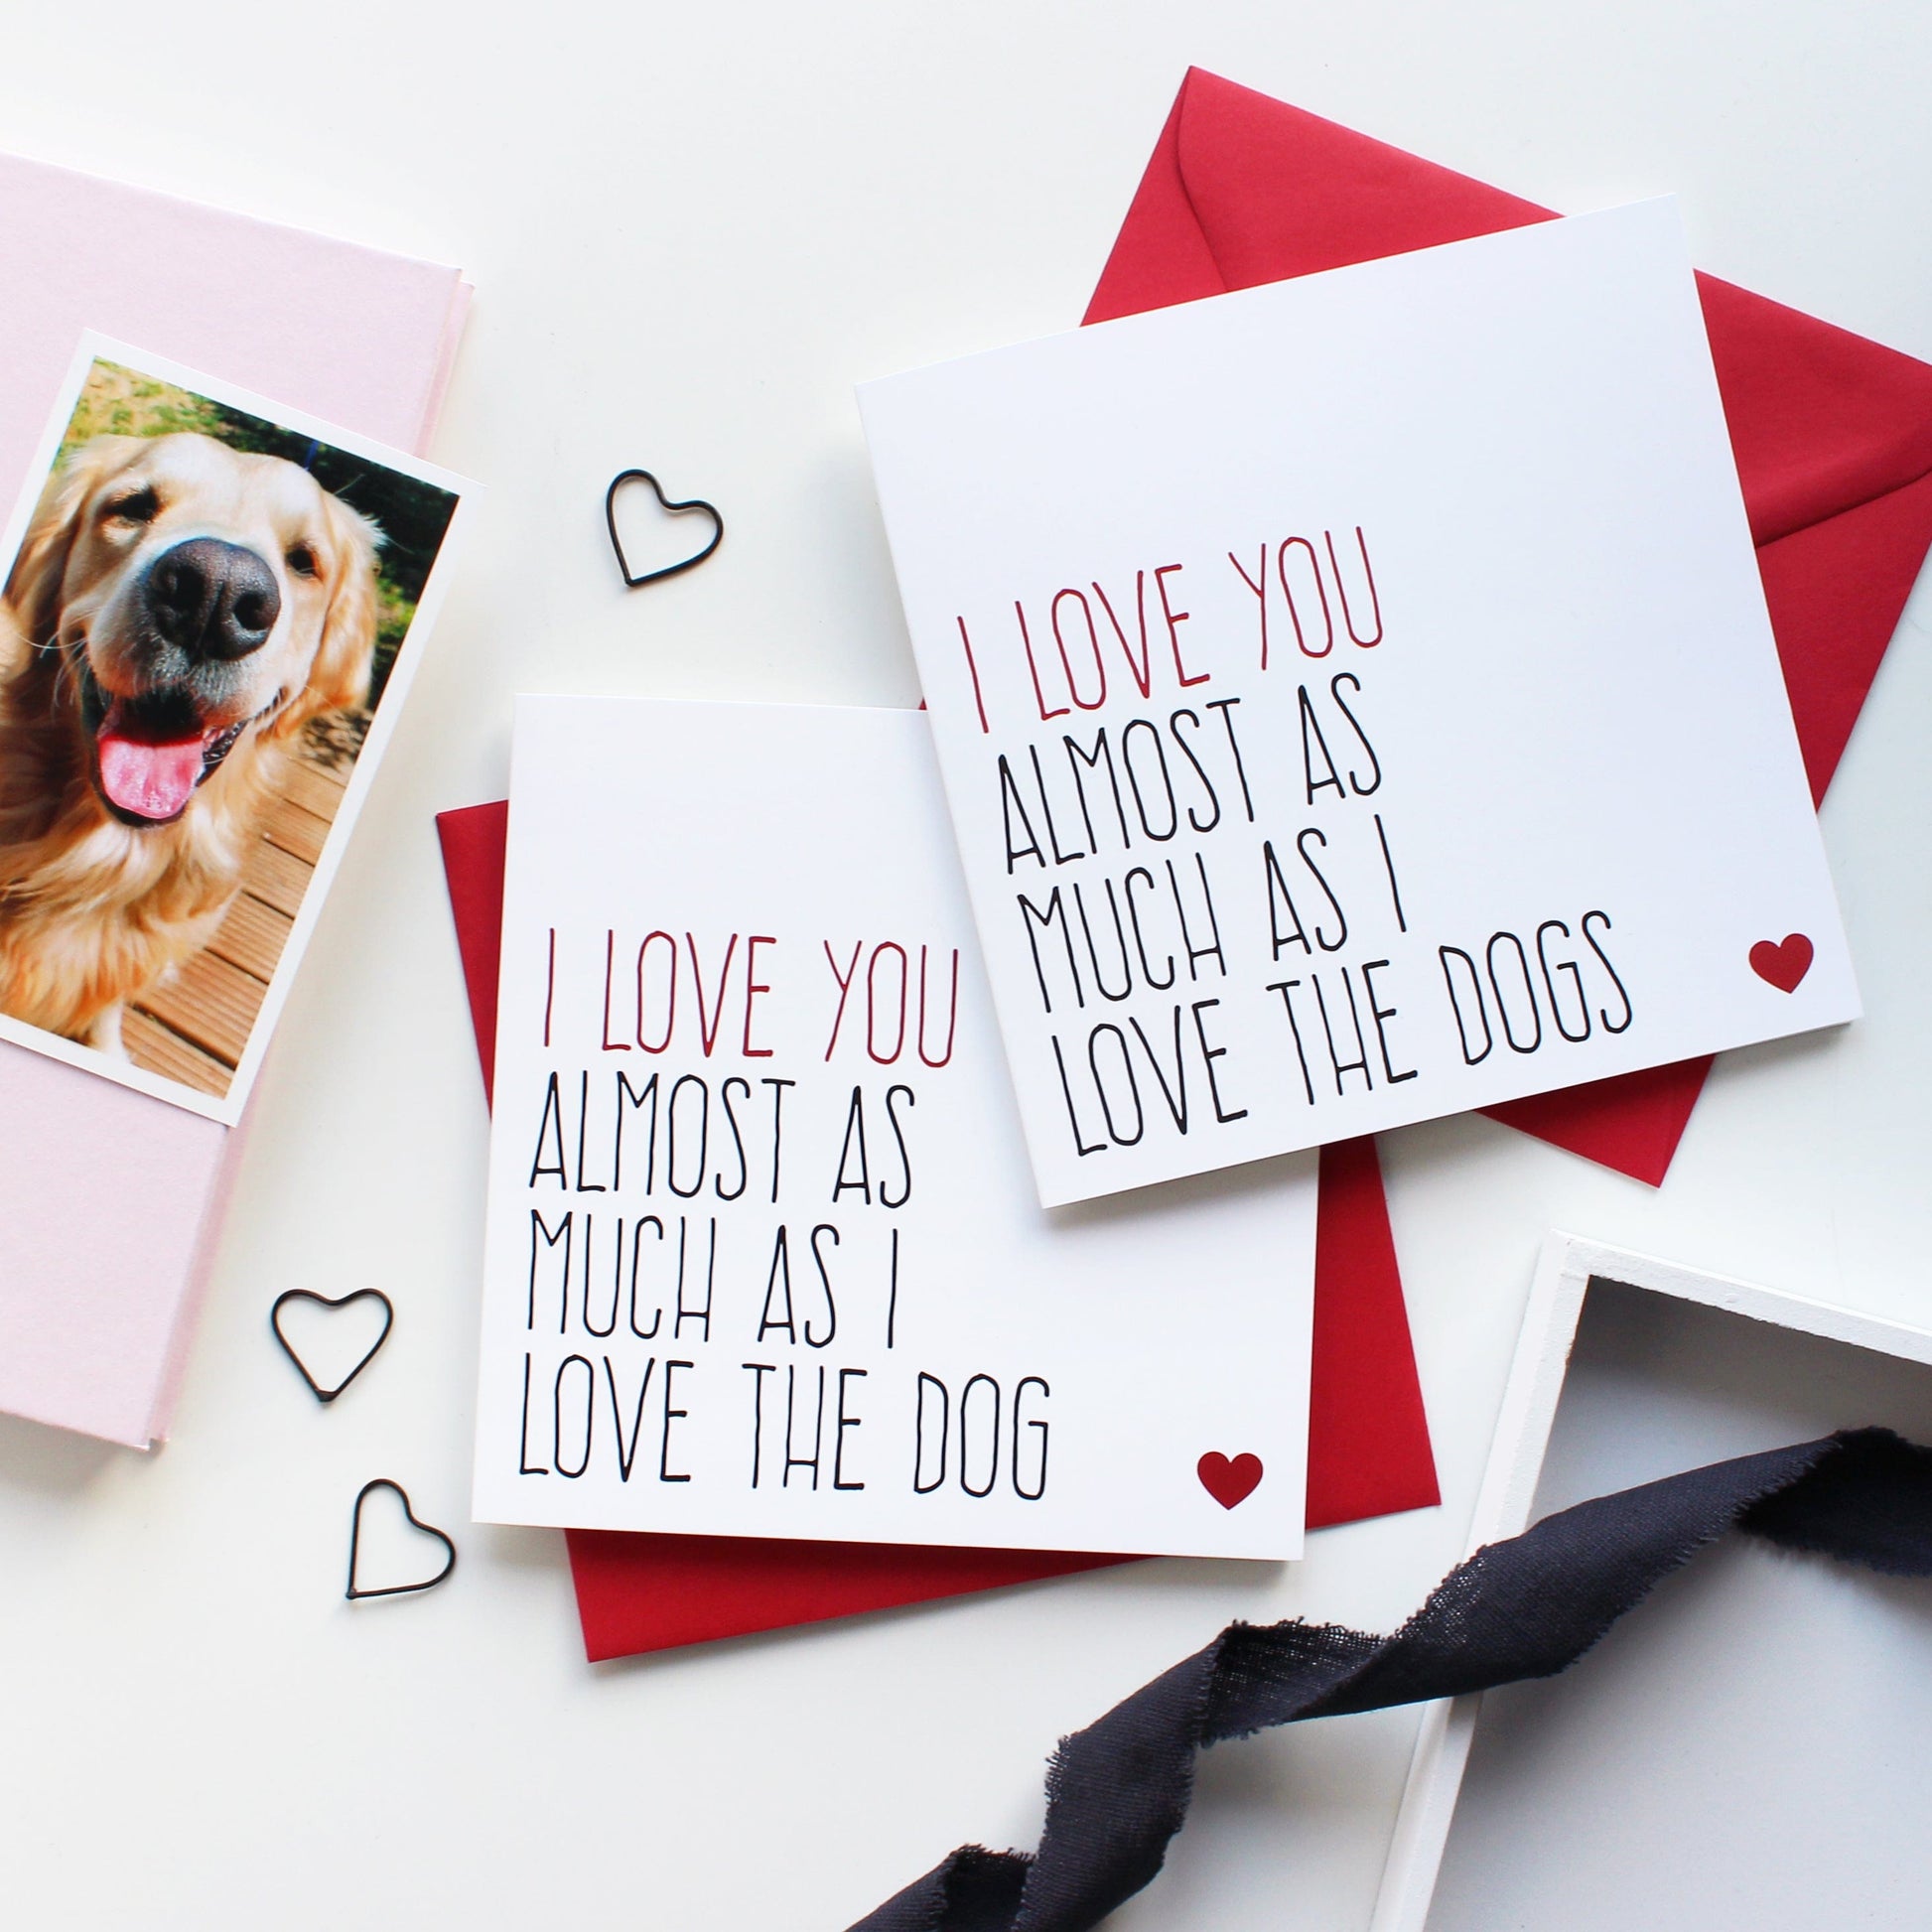 Love you almost as much as the dog Valentine's Day card from Purple Tree Designs